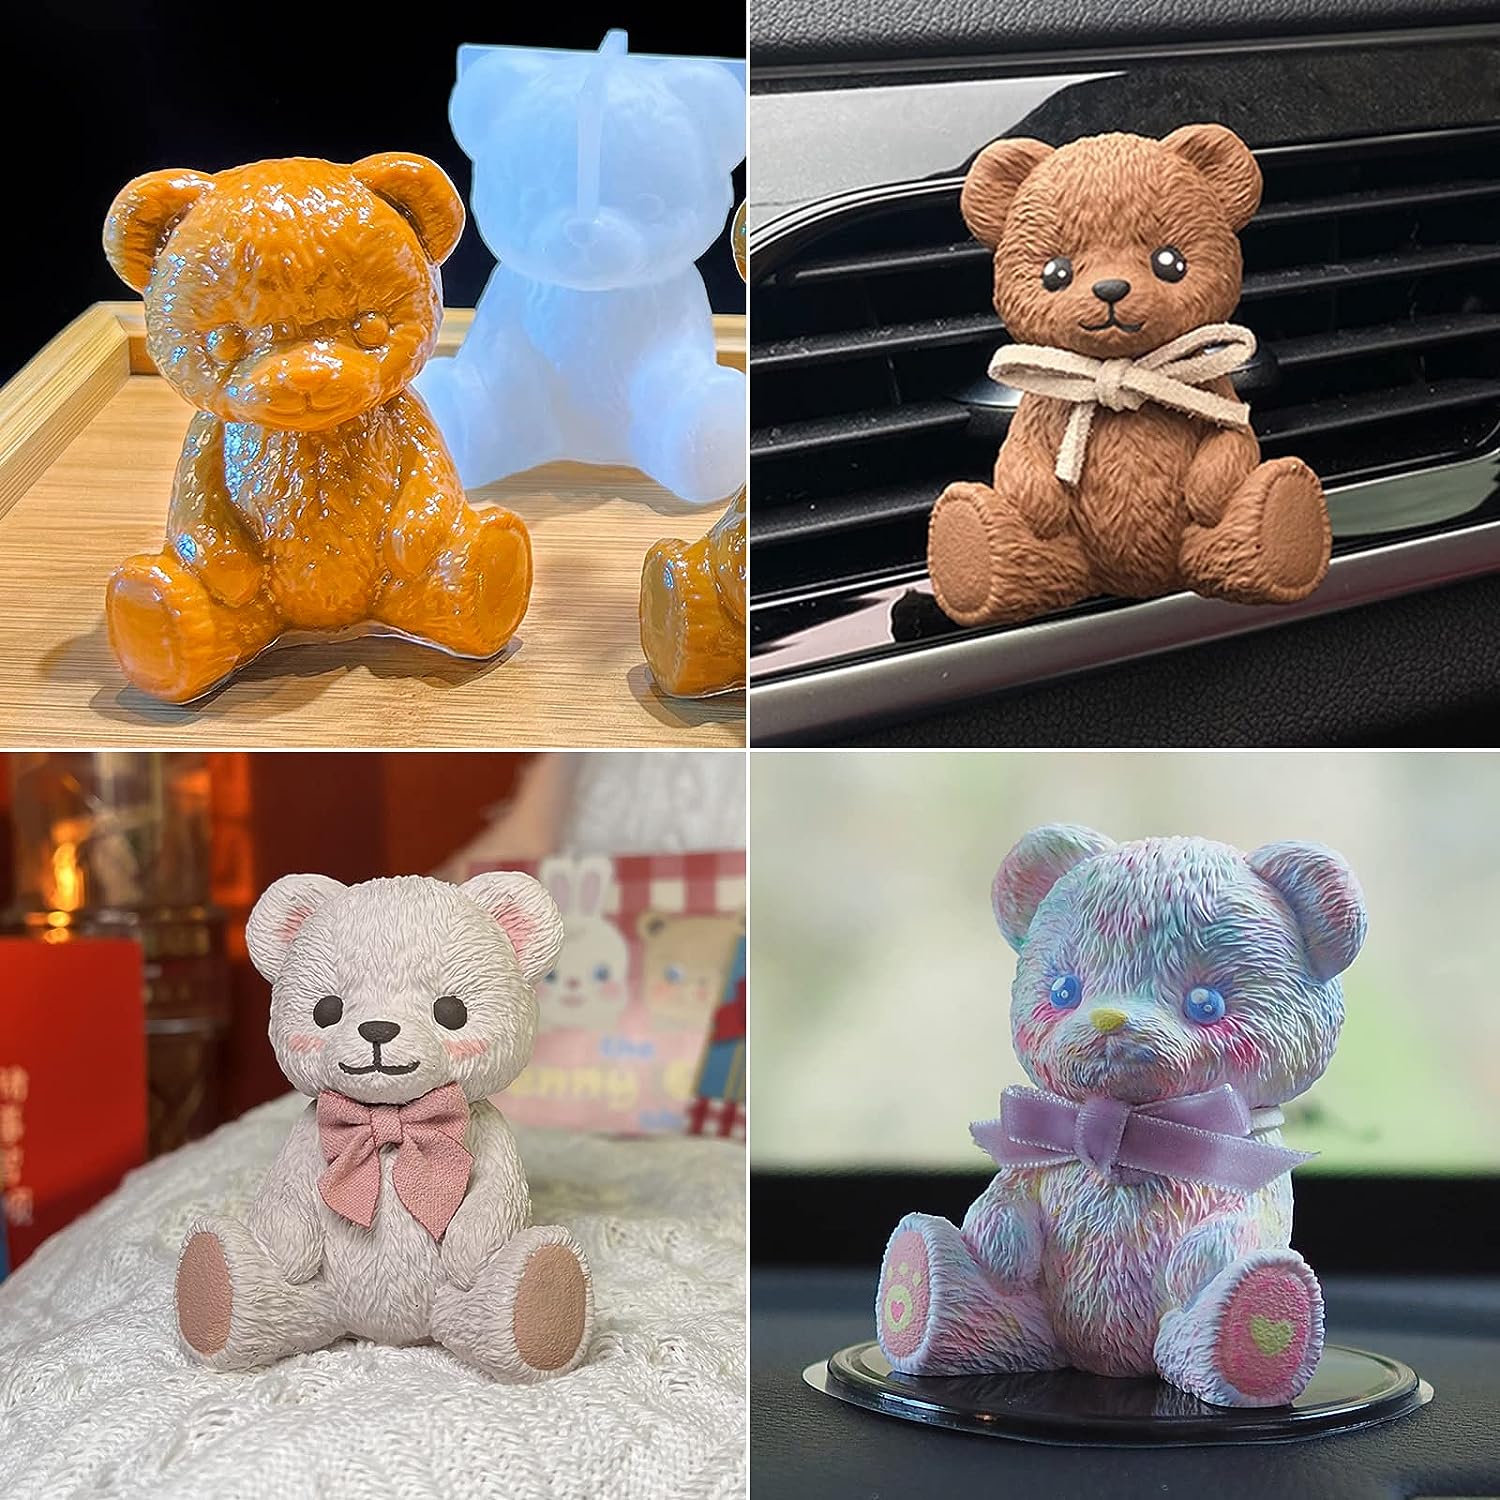 3d Bears Silicone Mold. Food Mold for Chocolate. Craft Mold for Soap,  Epoxy, Concrete, Plaster Etc Mother's Day Shaped Mold. 